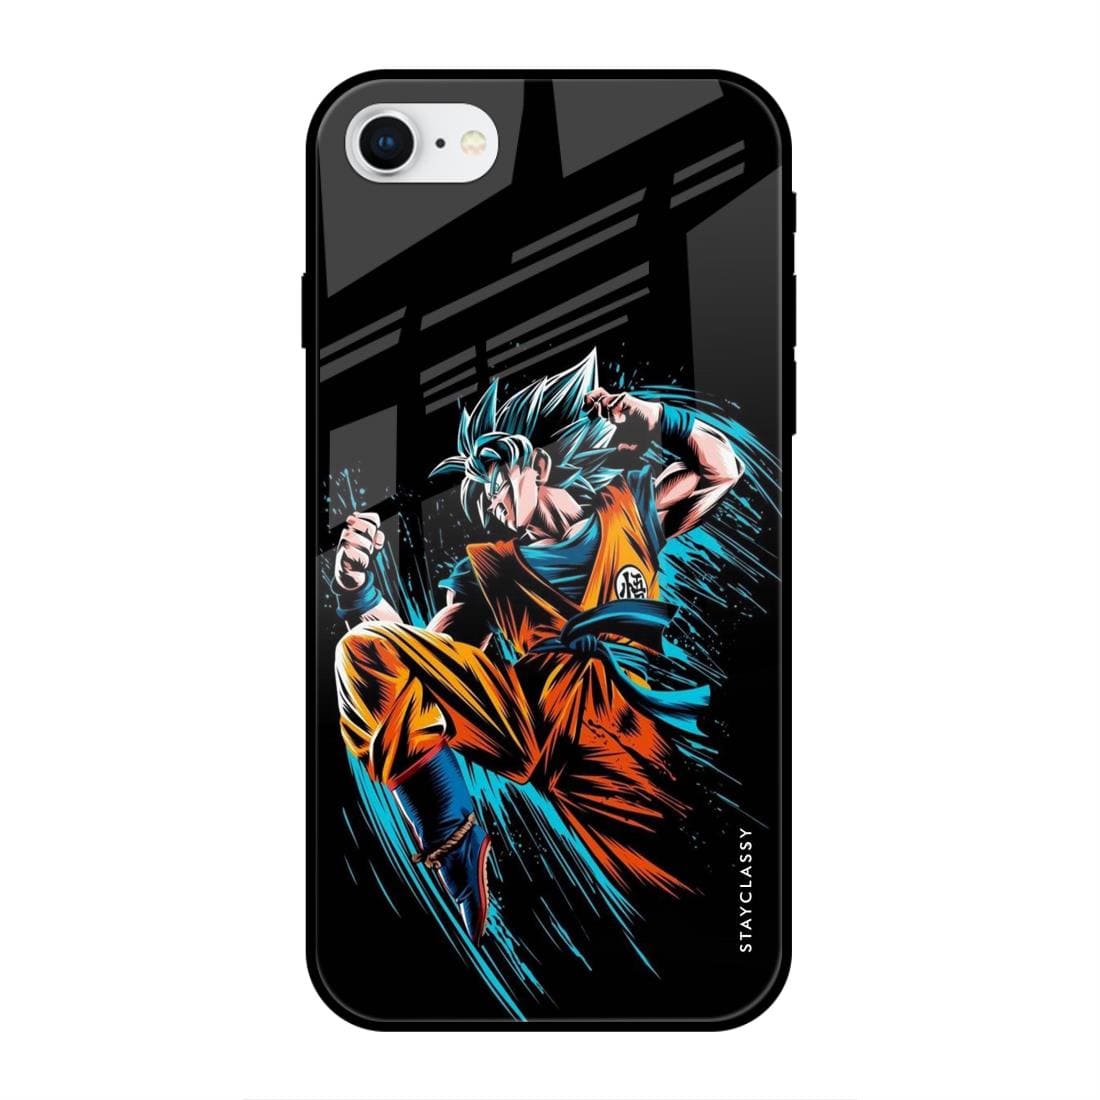 INTELLIZE Back Cover For APPLE iPHONE 7 iPHONE 8 iPHONE SE LUFFY ONE  PIECE LUFFY ANIME MONKEY D LUFFY CARTOON